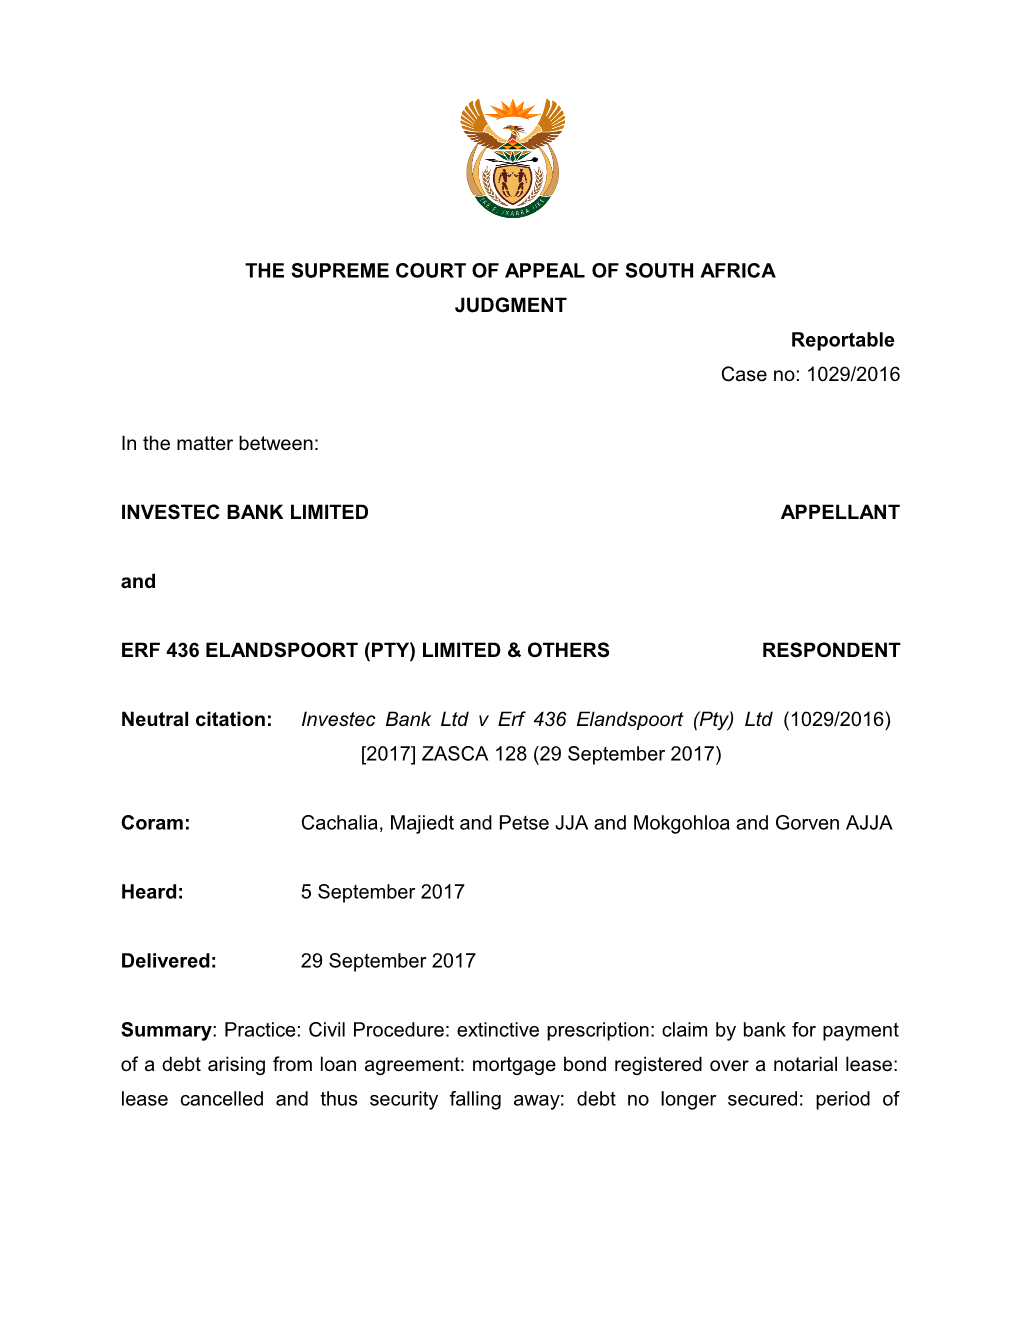 The Supreme Court of Appeal of South Africa s9